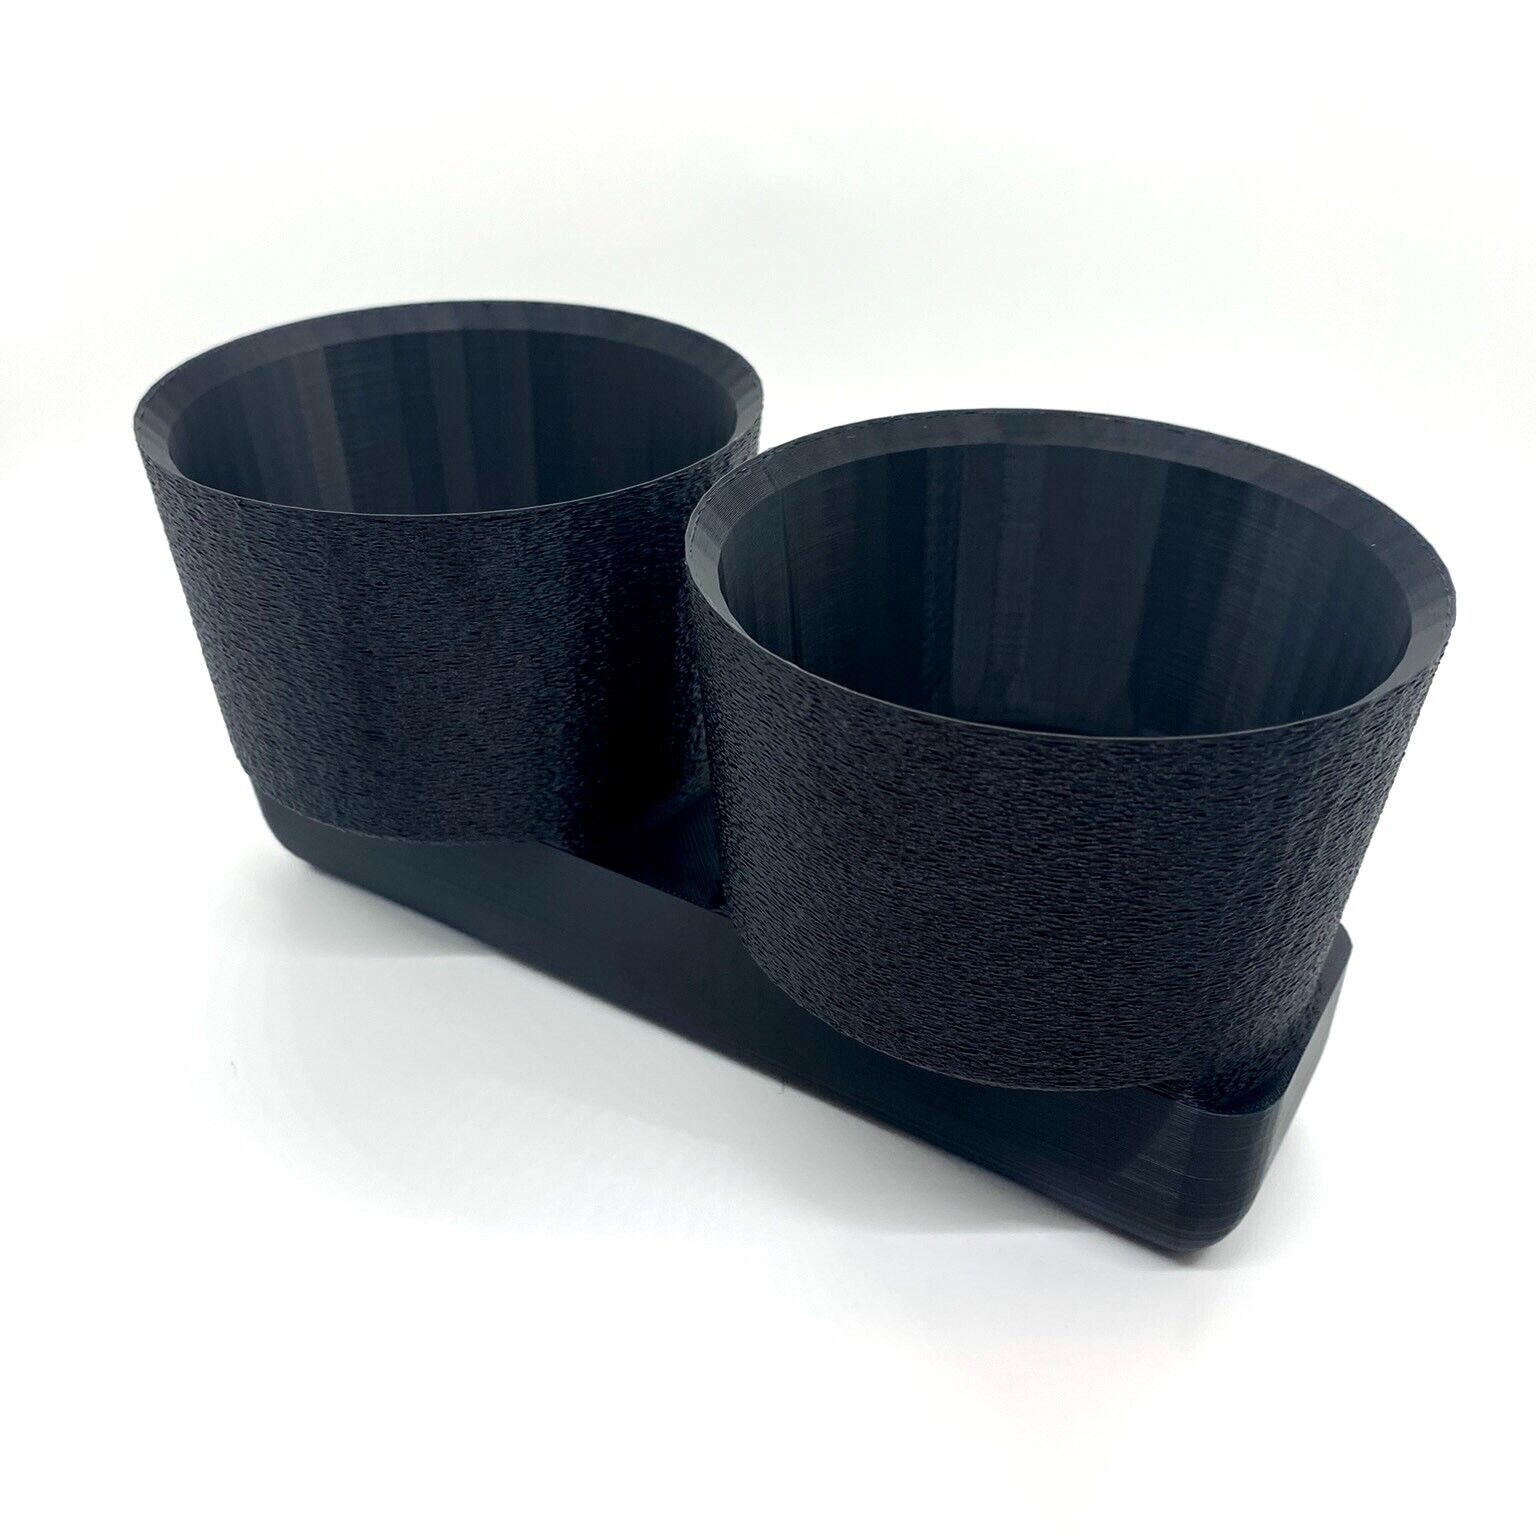 BMW E30 Cupholder | Double 20oz Cup Holder | Fits Yeti | OEM Interior Finish